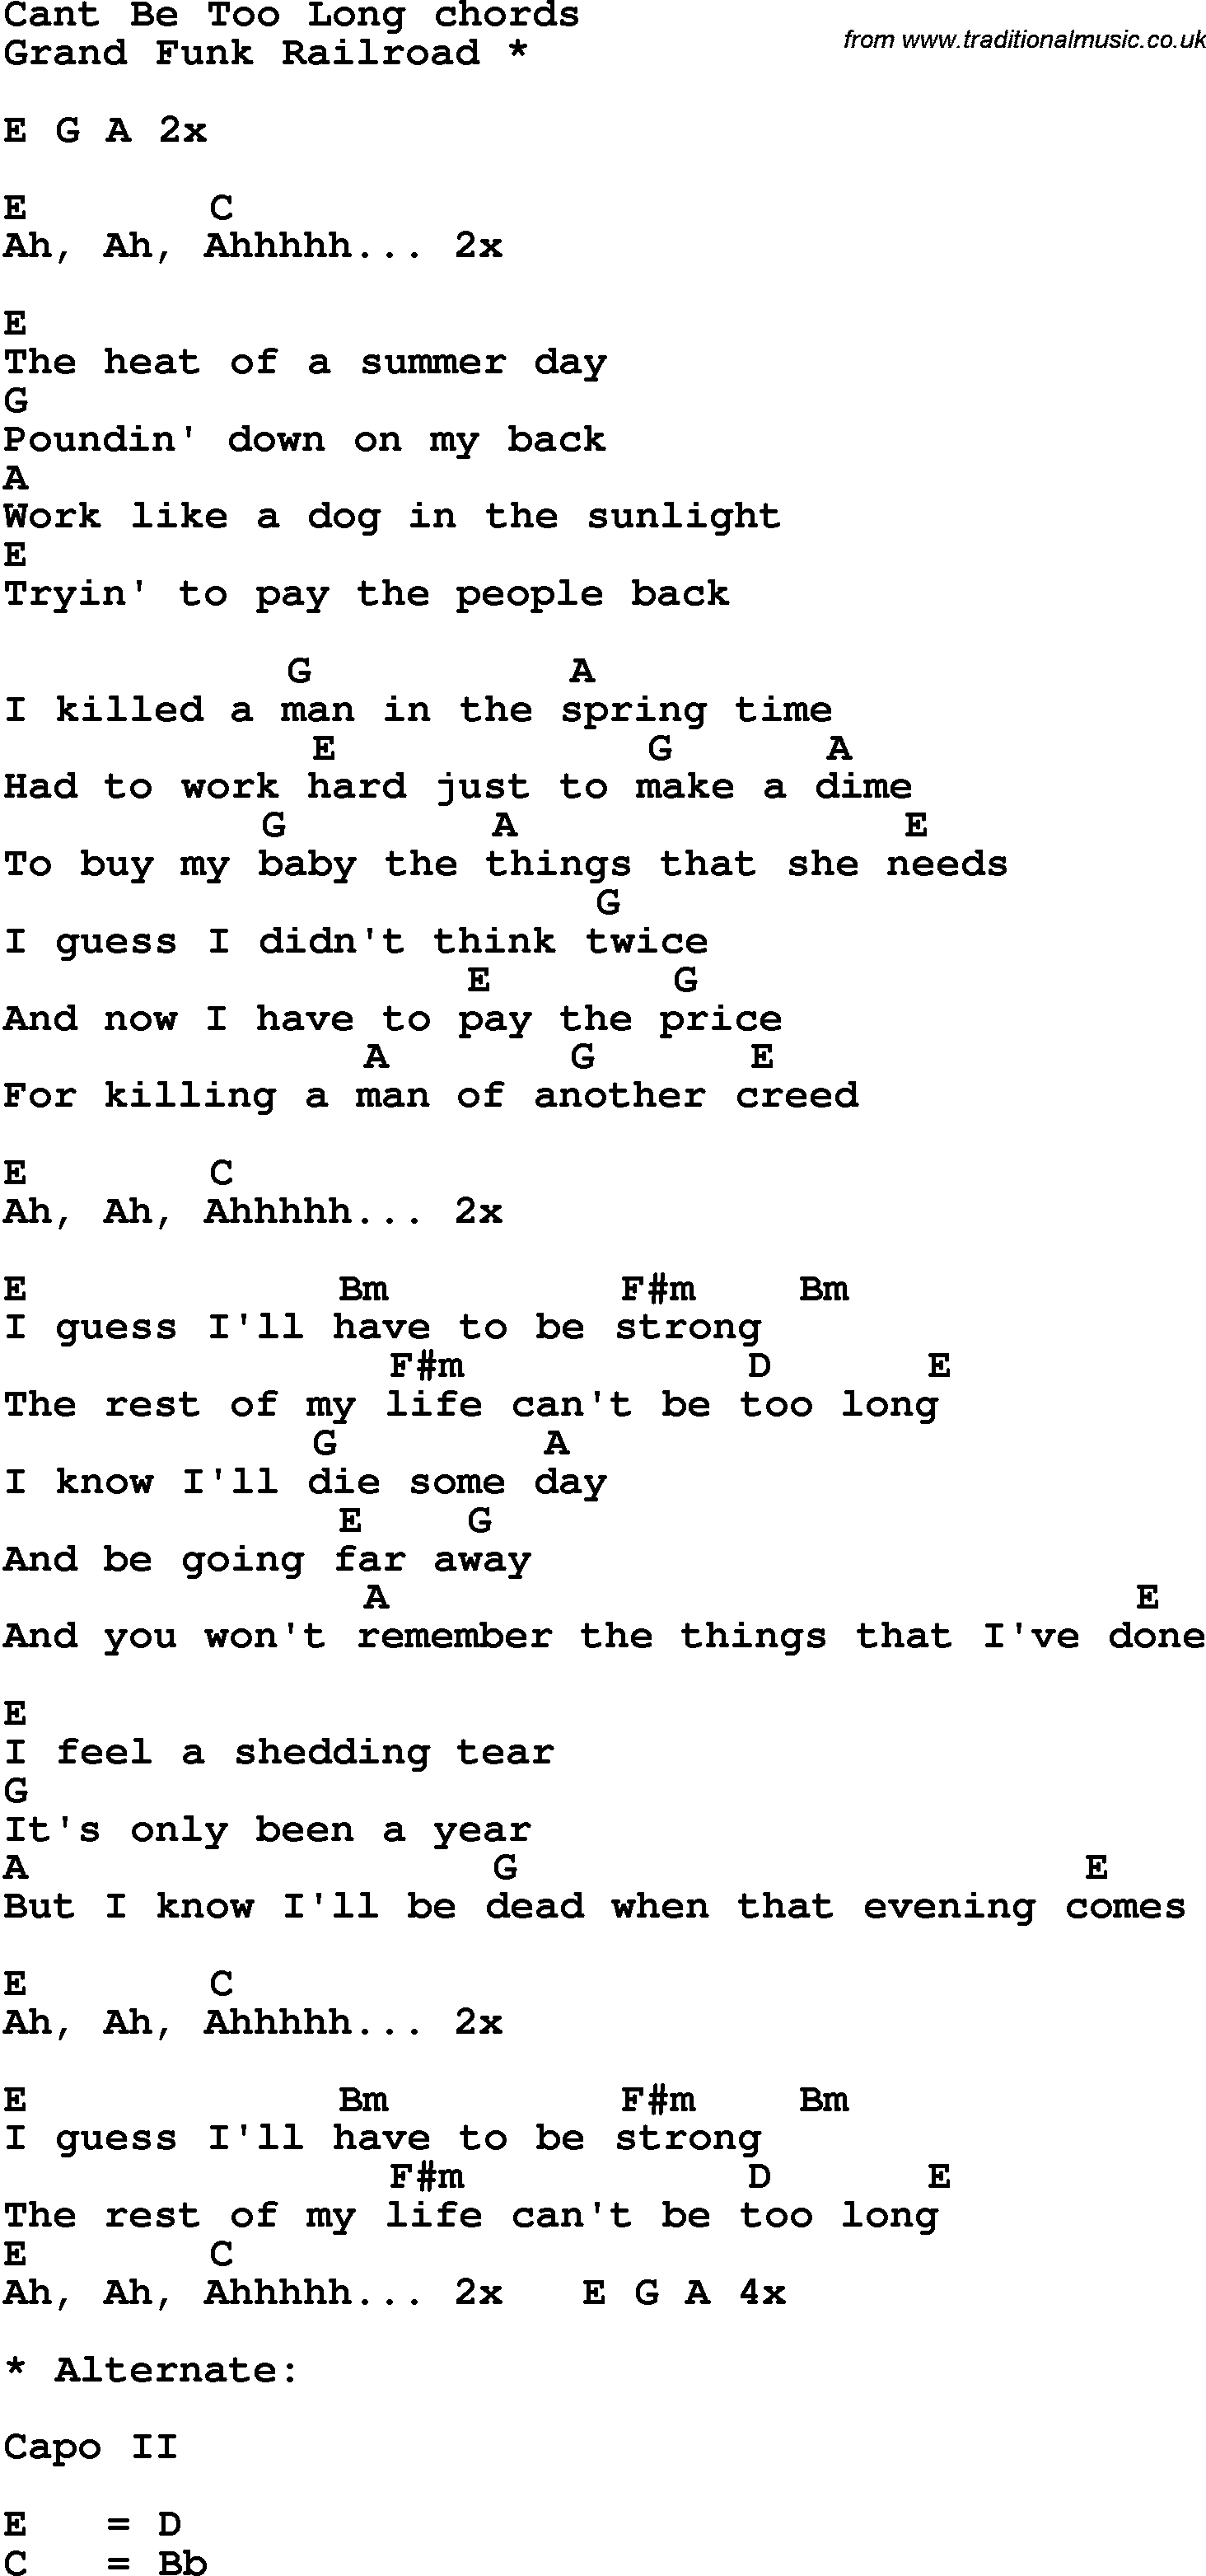 Song Lyrics with guitar chords for Can't Be Too Long